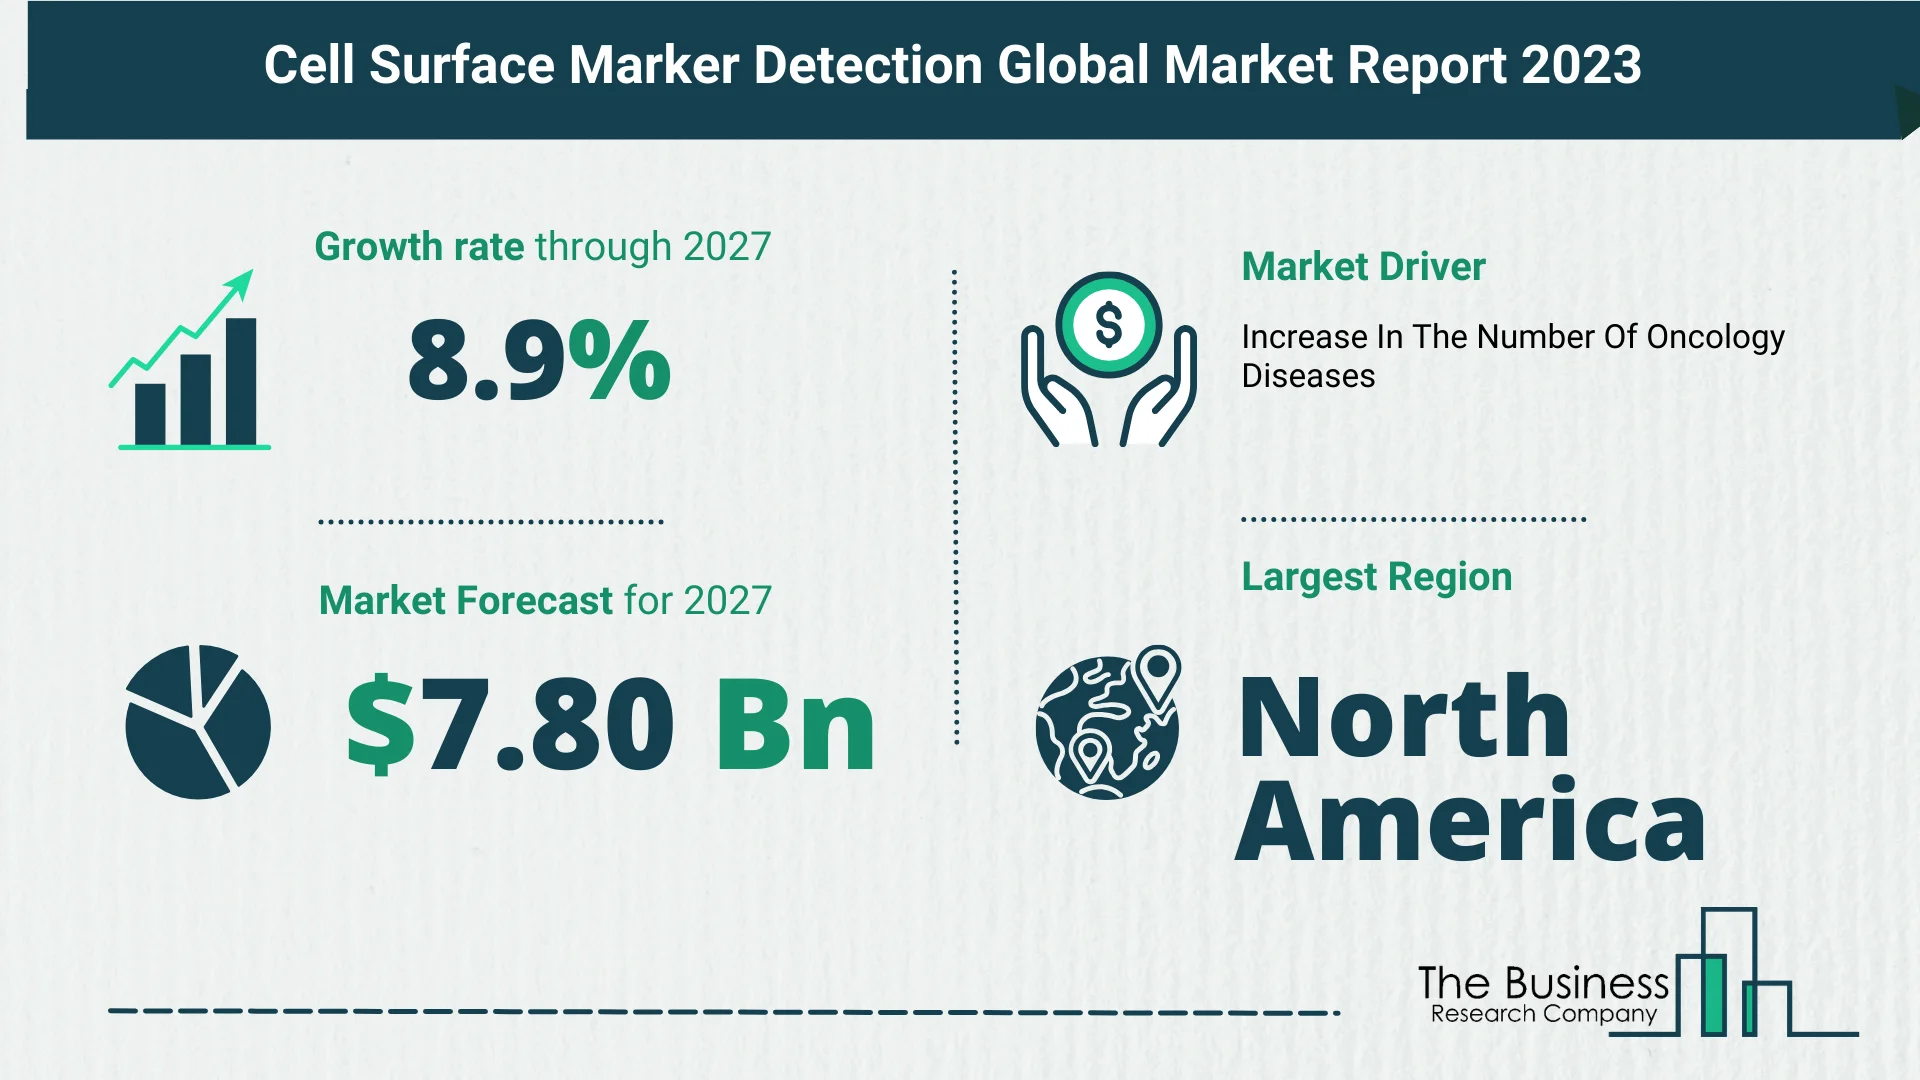 Global Cell Surface Marker Detection Market Size